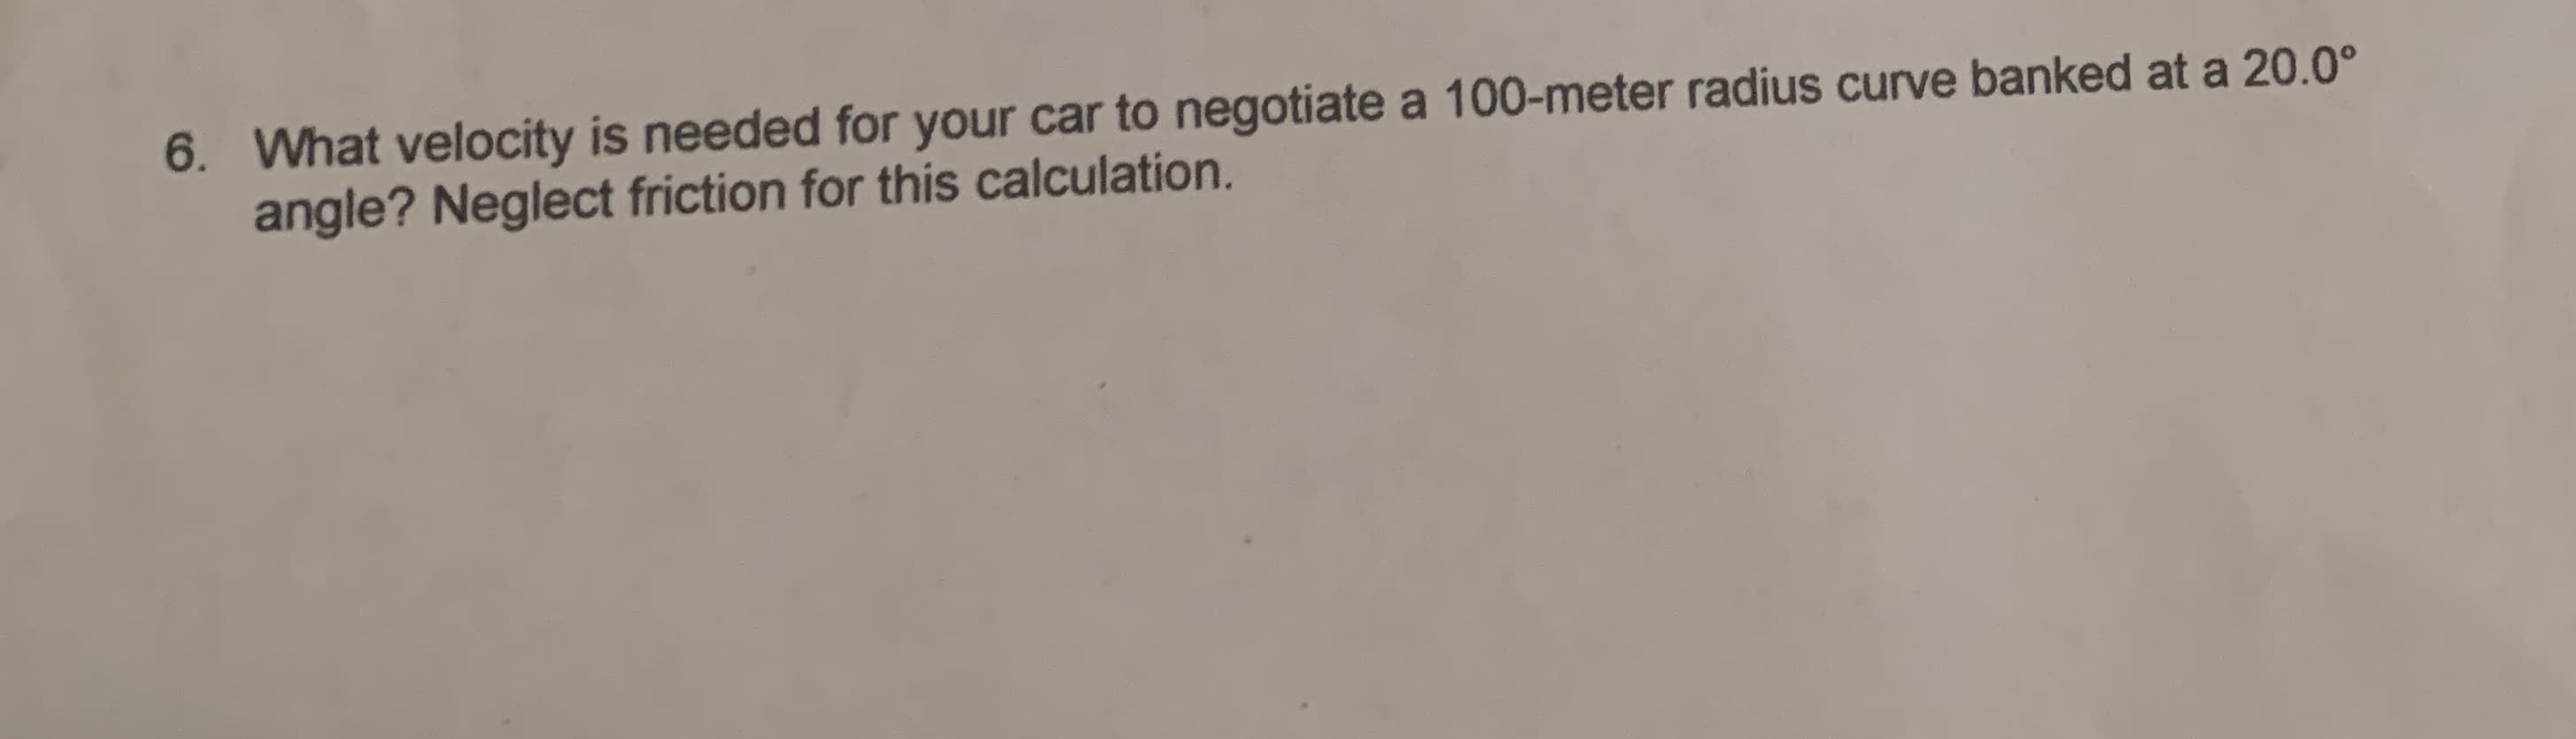 6
What velocity is needed for your car to negotiate a 100-meter radius curve banked at a 20.0°
angle? Neglect friction for this calculation
